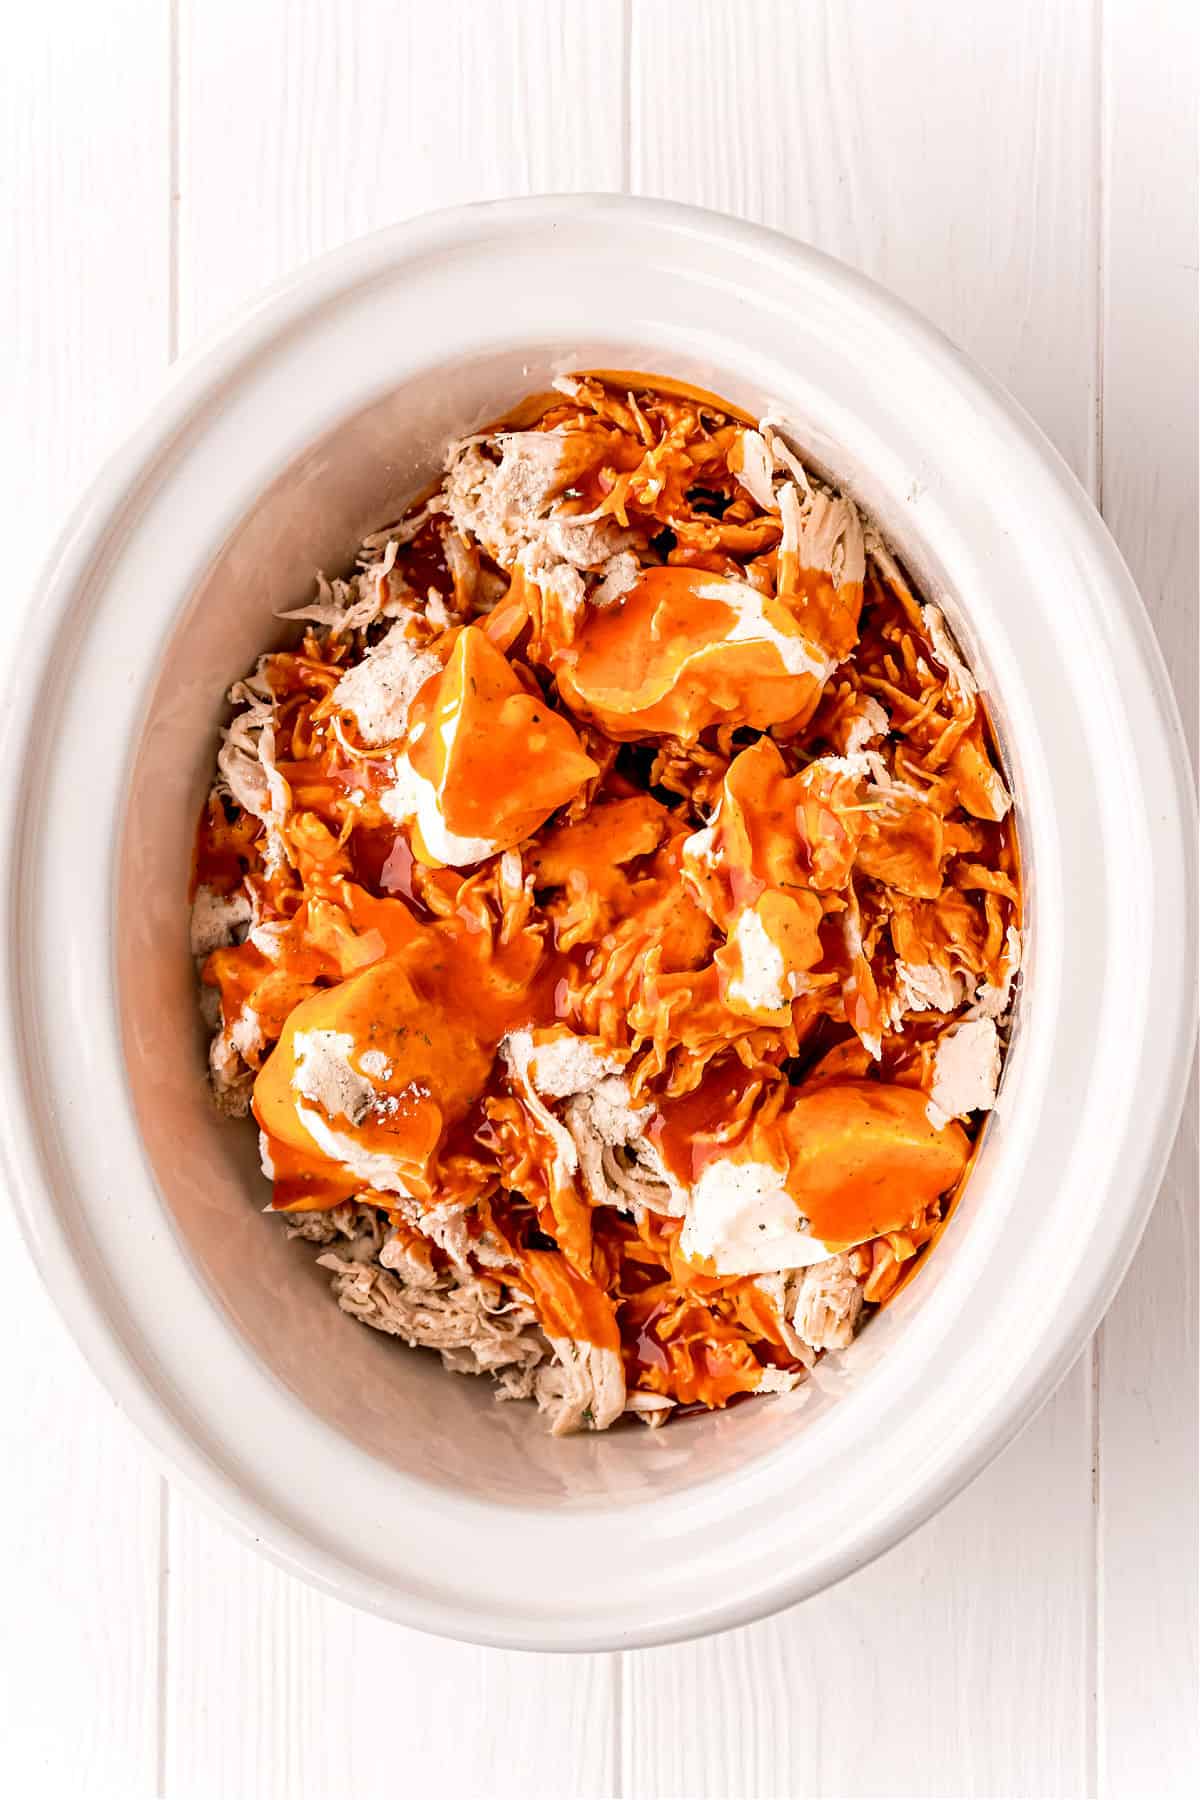 White slow cooker with shredded chicken, wing sauce, and cheeses.